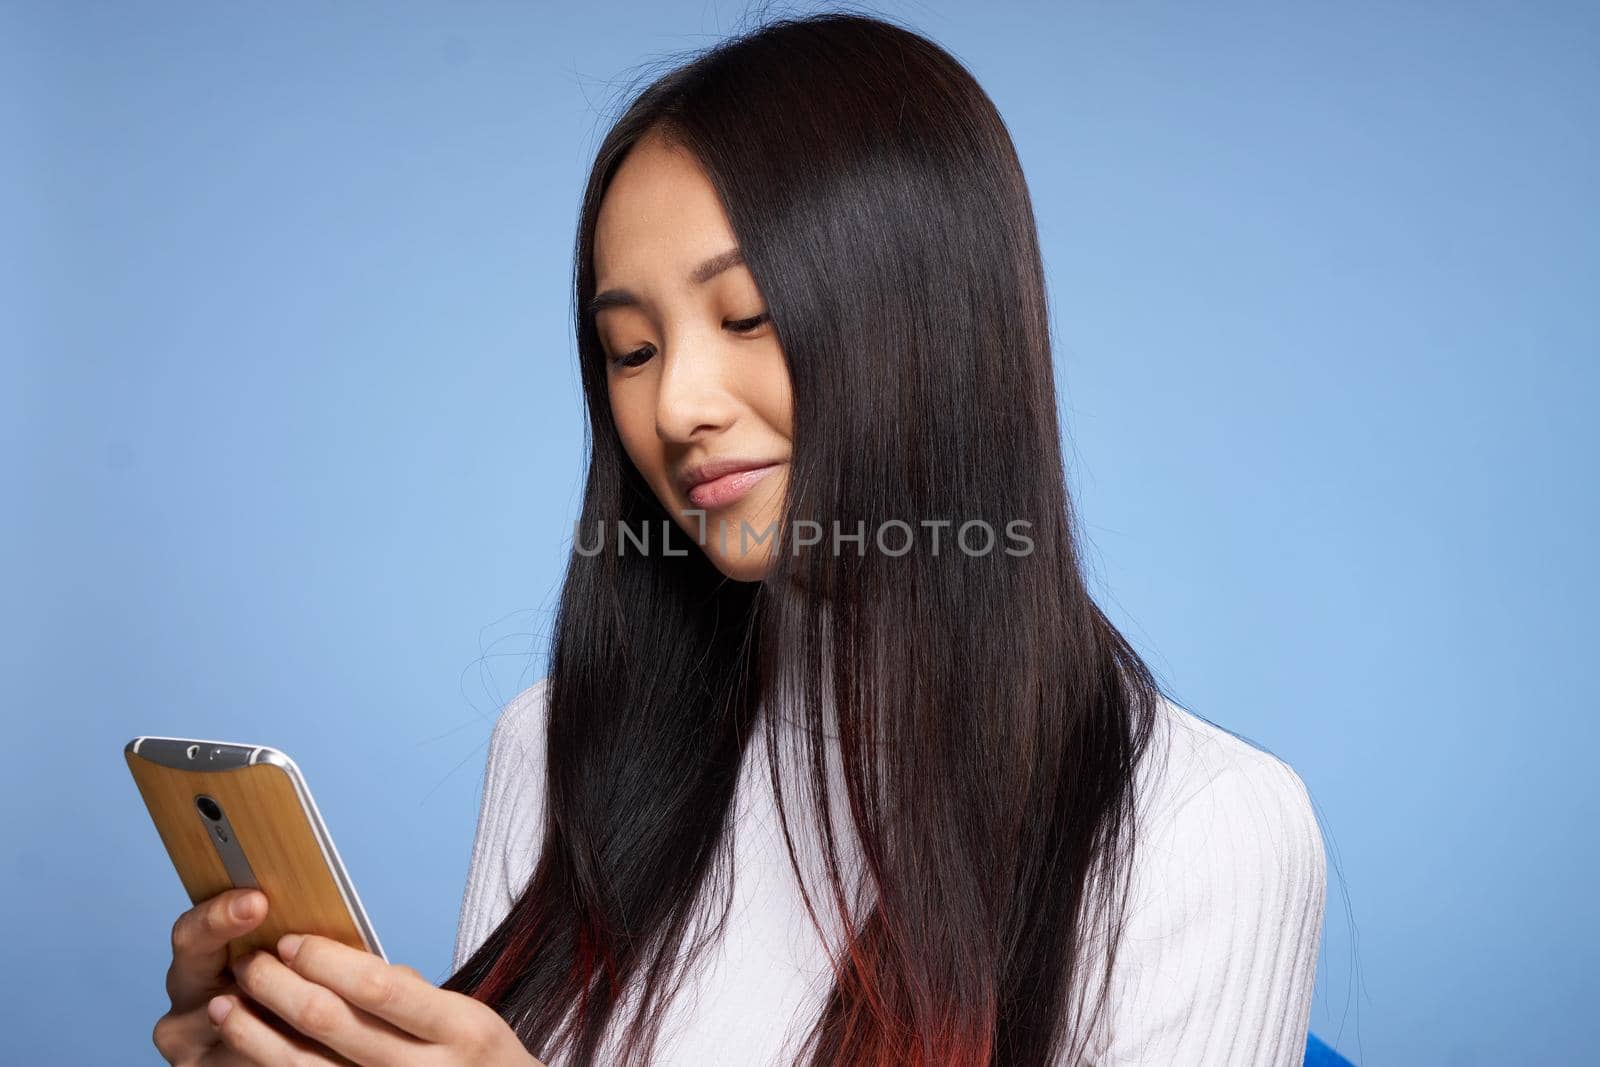 woman asian appearance phone hands communication technology lifestyle blue background by SHOTPRIME